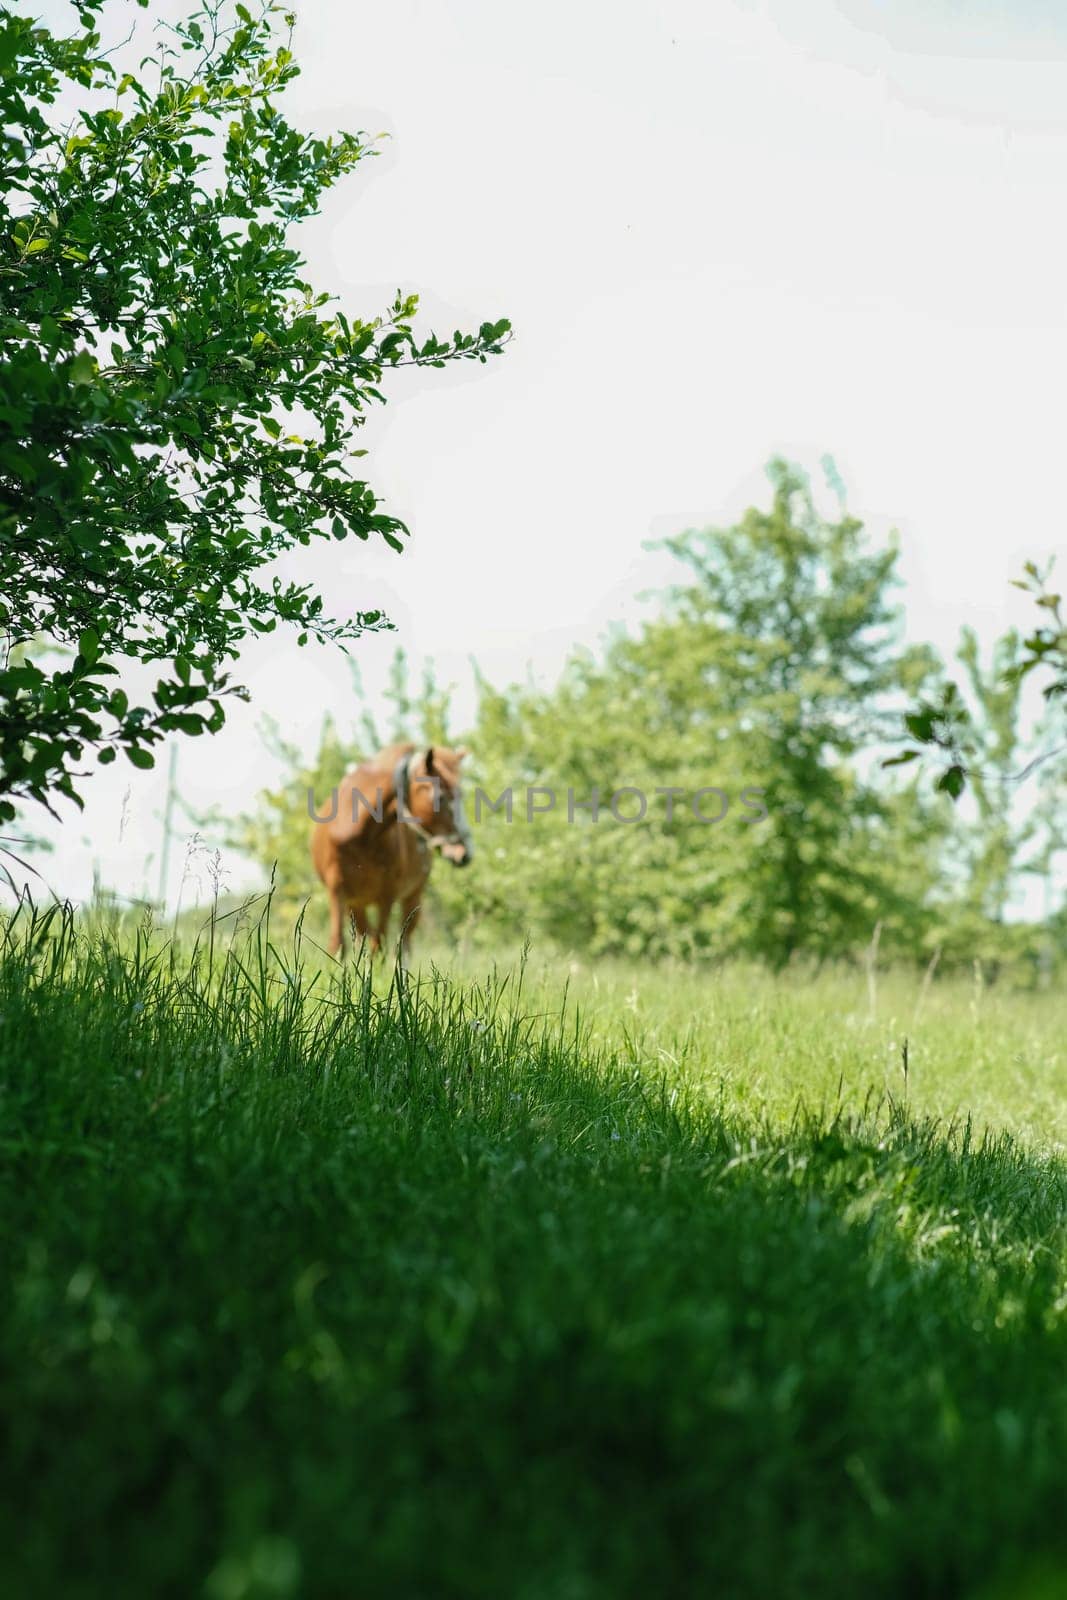 Bushes and a lawn, a red horse is out of focus in the background. The horse in the village is eating grass in the background.